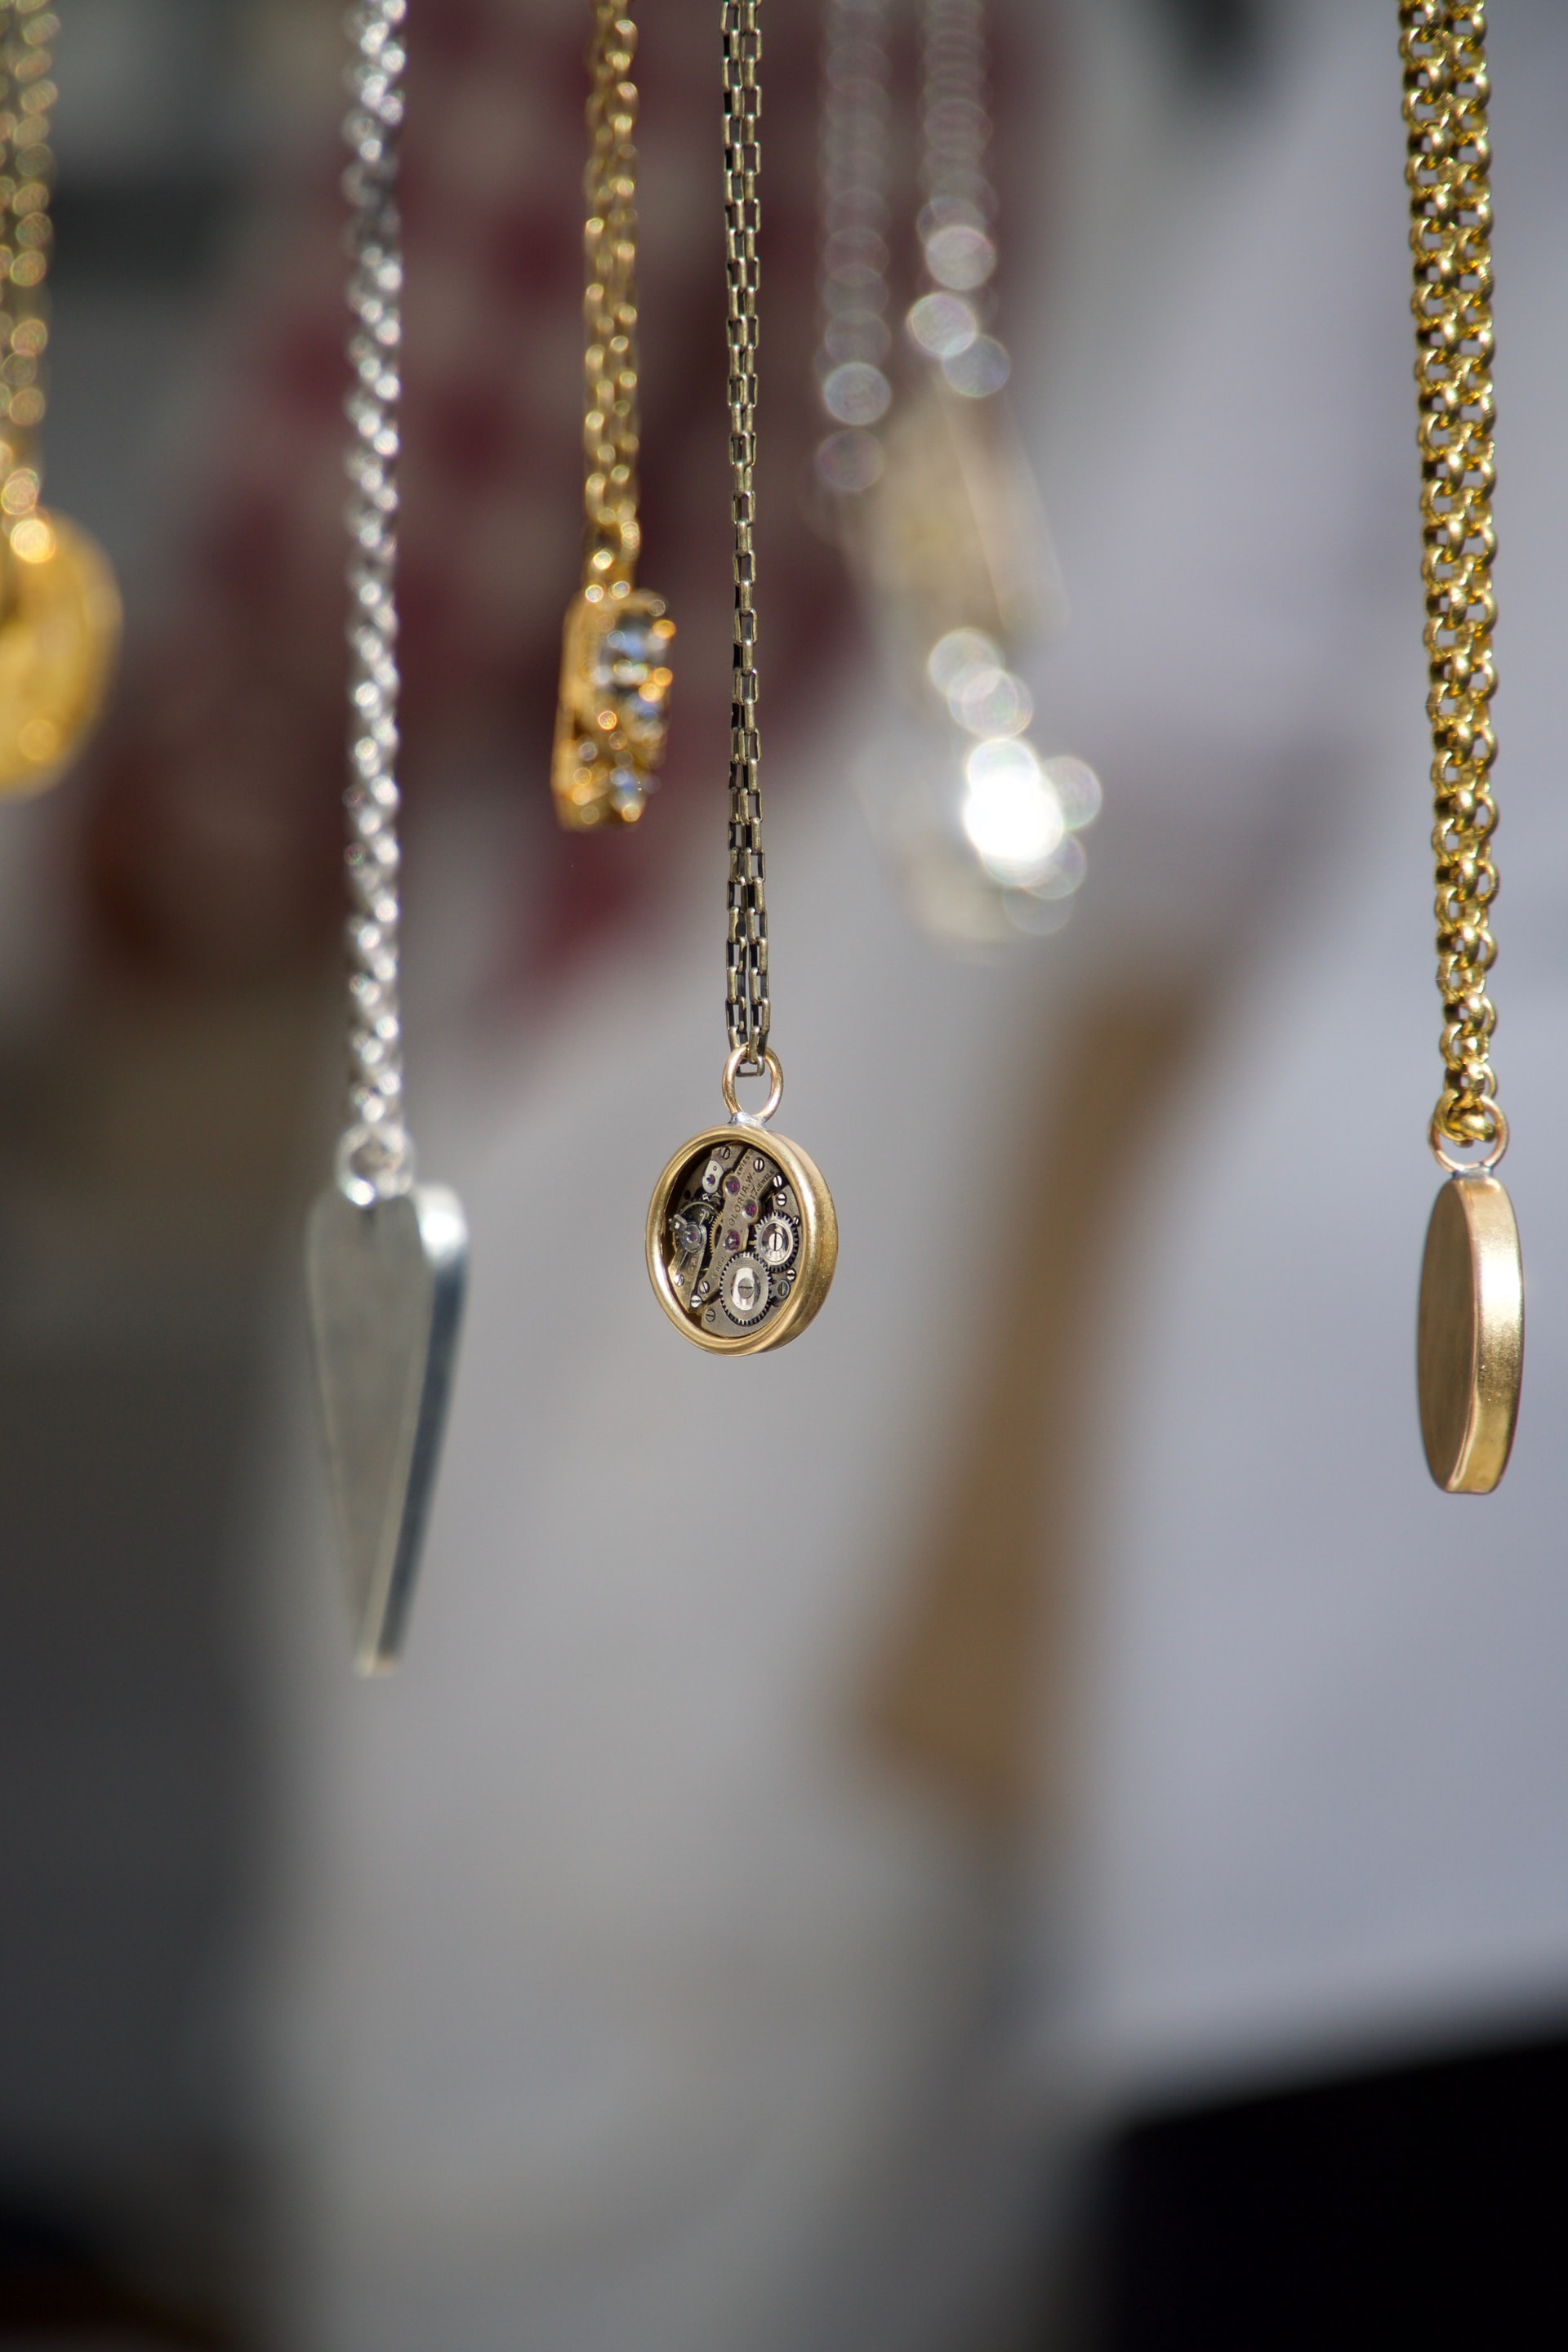 Vintage jewellery for Christmas gifts, tips - Ph. Alex Chambers, Unsplash